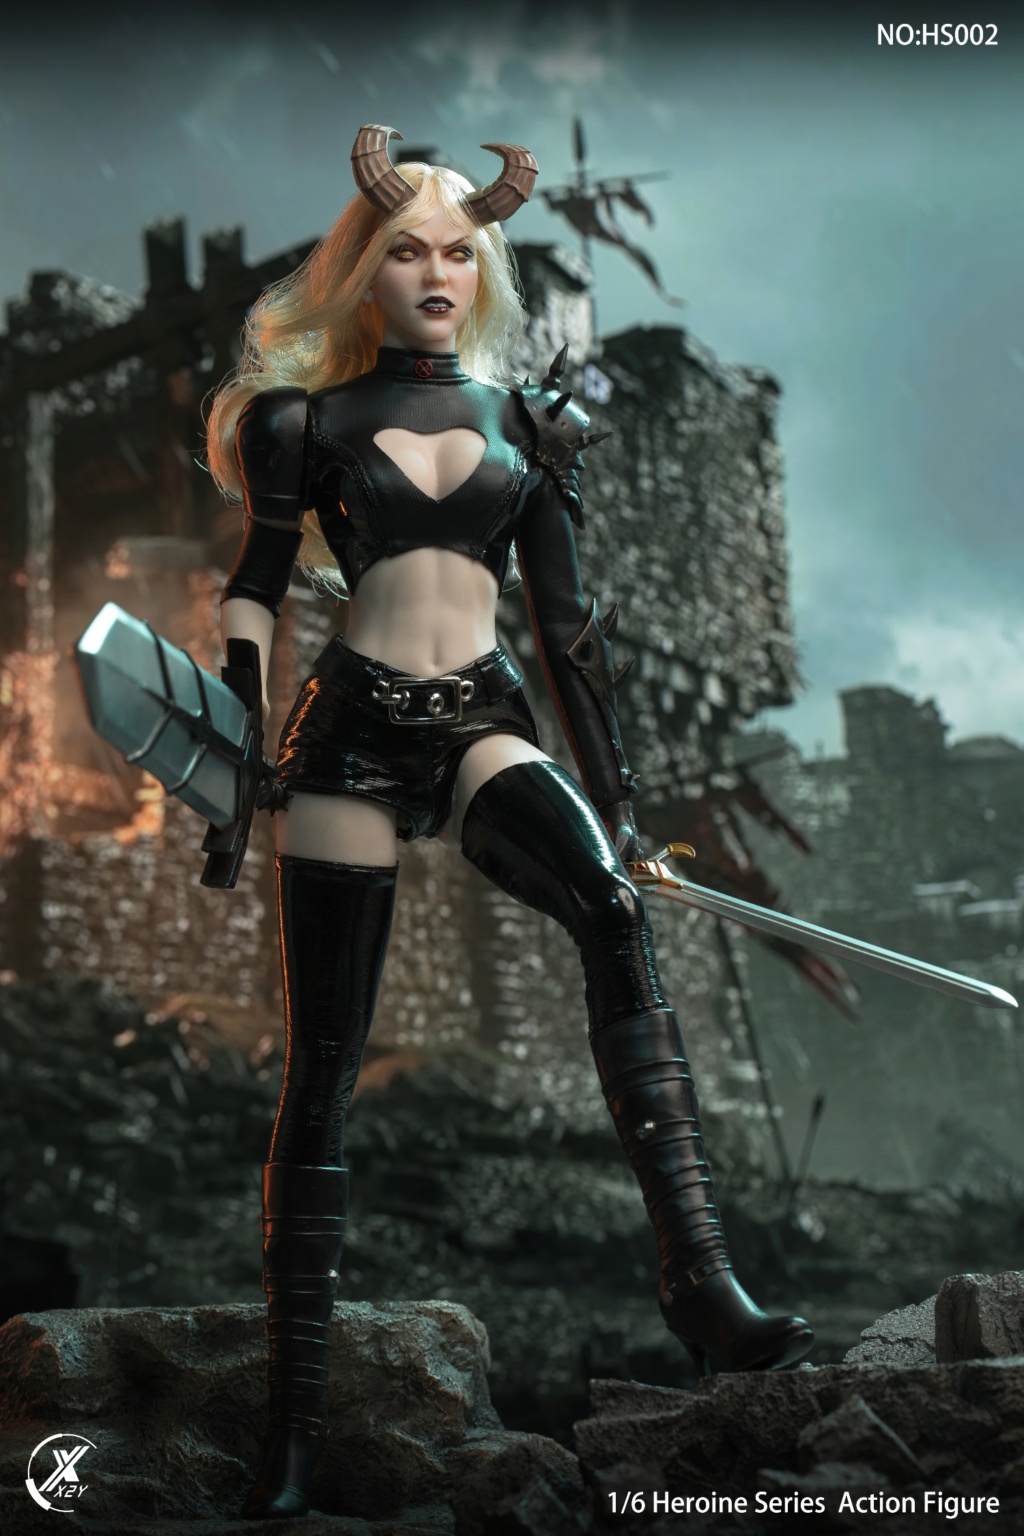 Fantasy - NEW PRODUCT: X2Y TOYS: 1/6 Heroine Series - Mysterious Female Warrior from Hell Double-Headed Female Doll # HS002 11200912